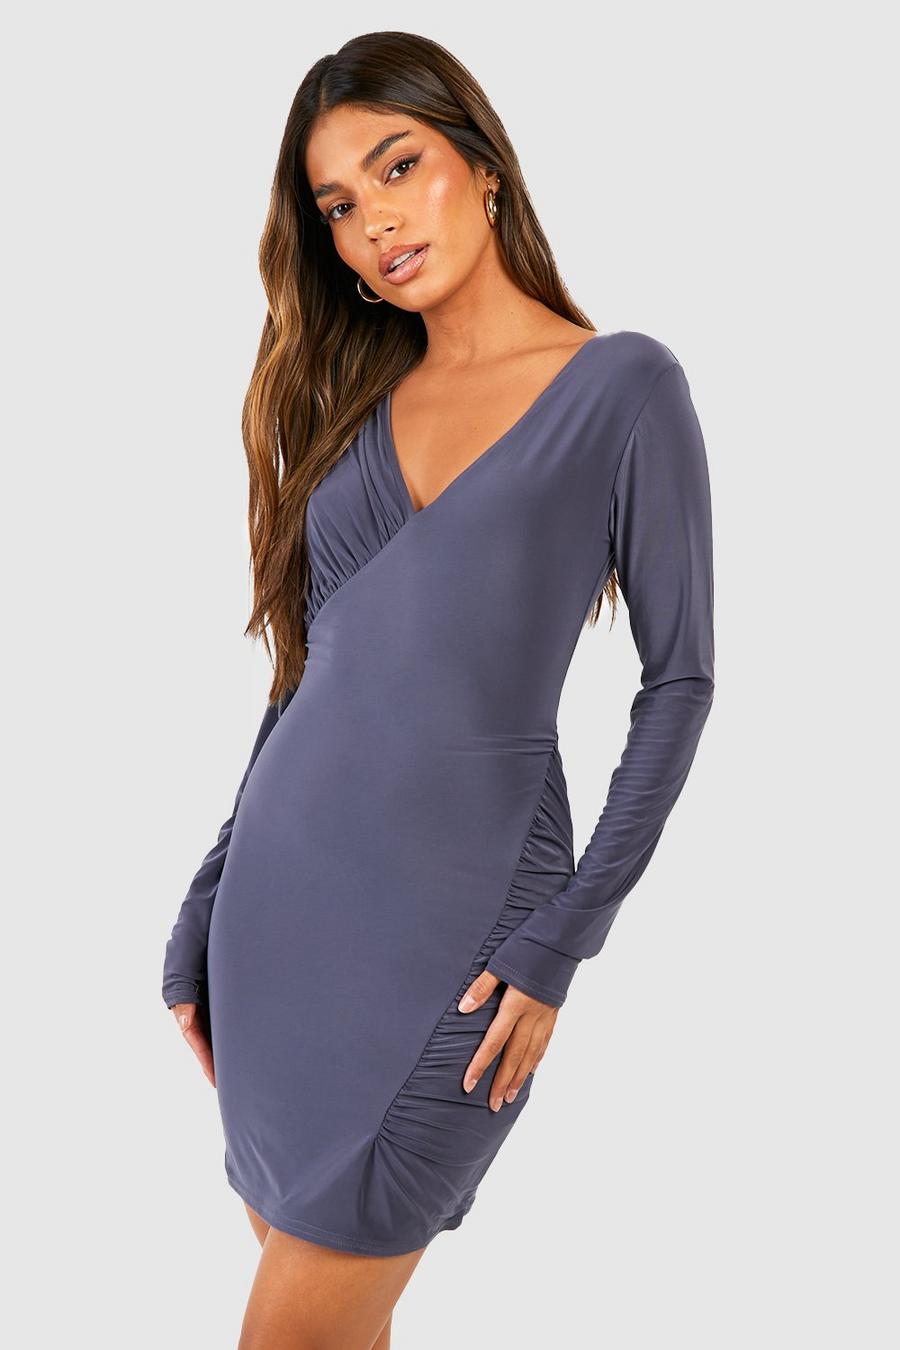 Charcoal grey Double Slinky Ruched Mini Dress